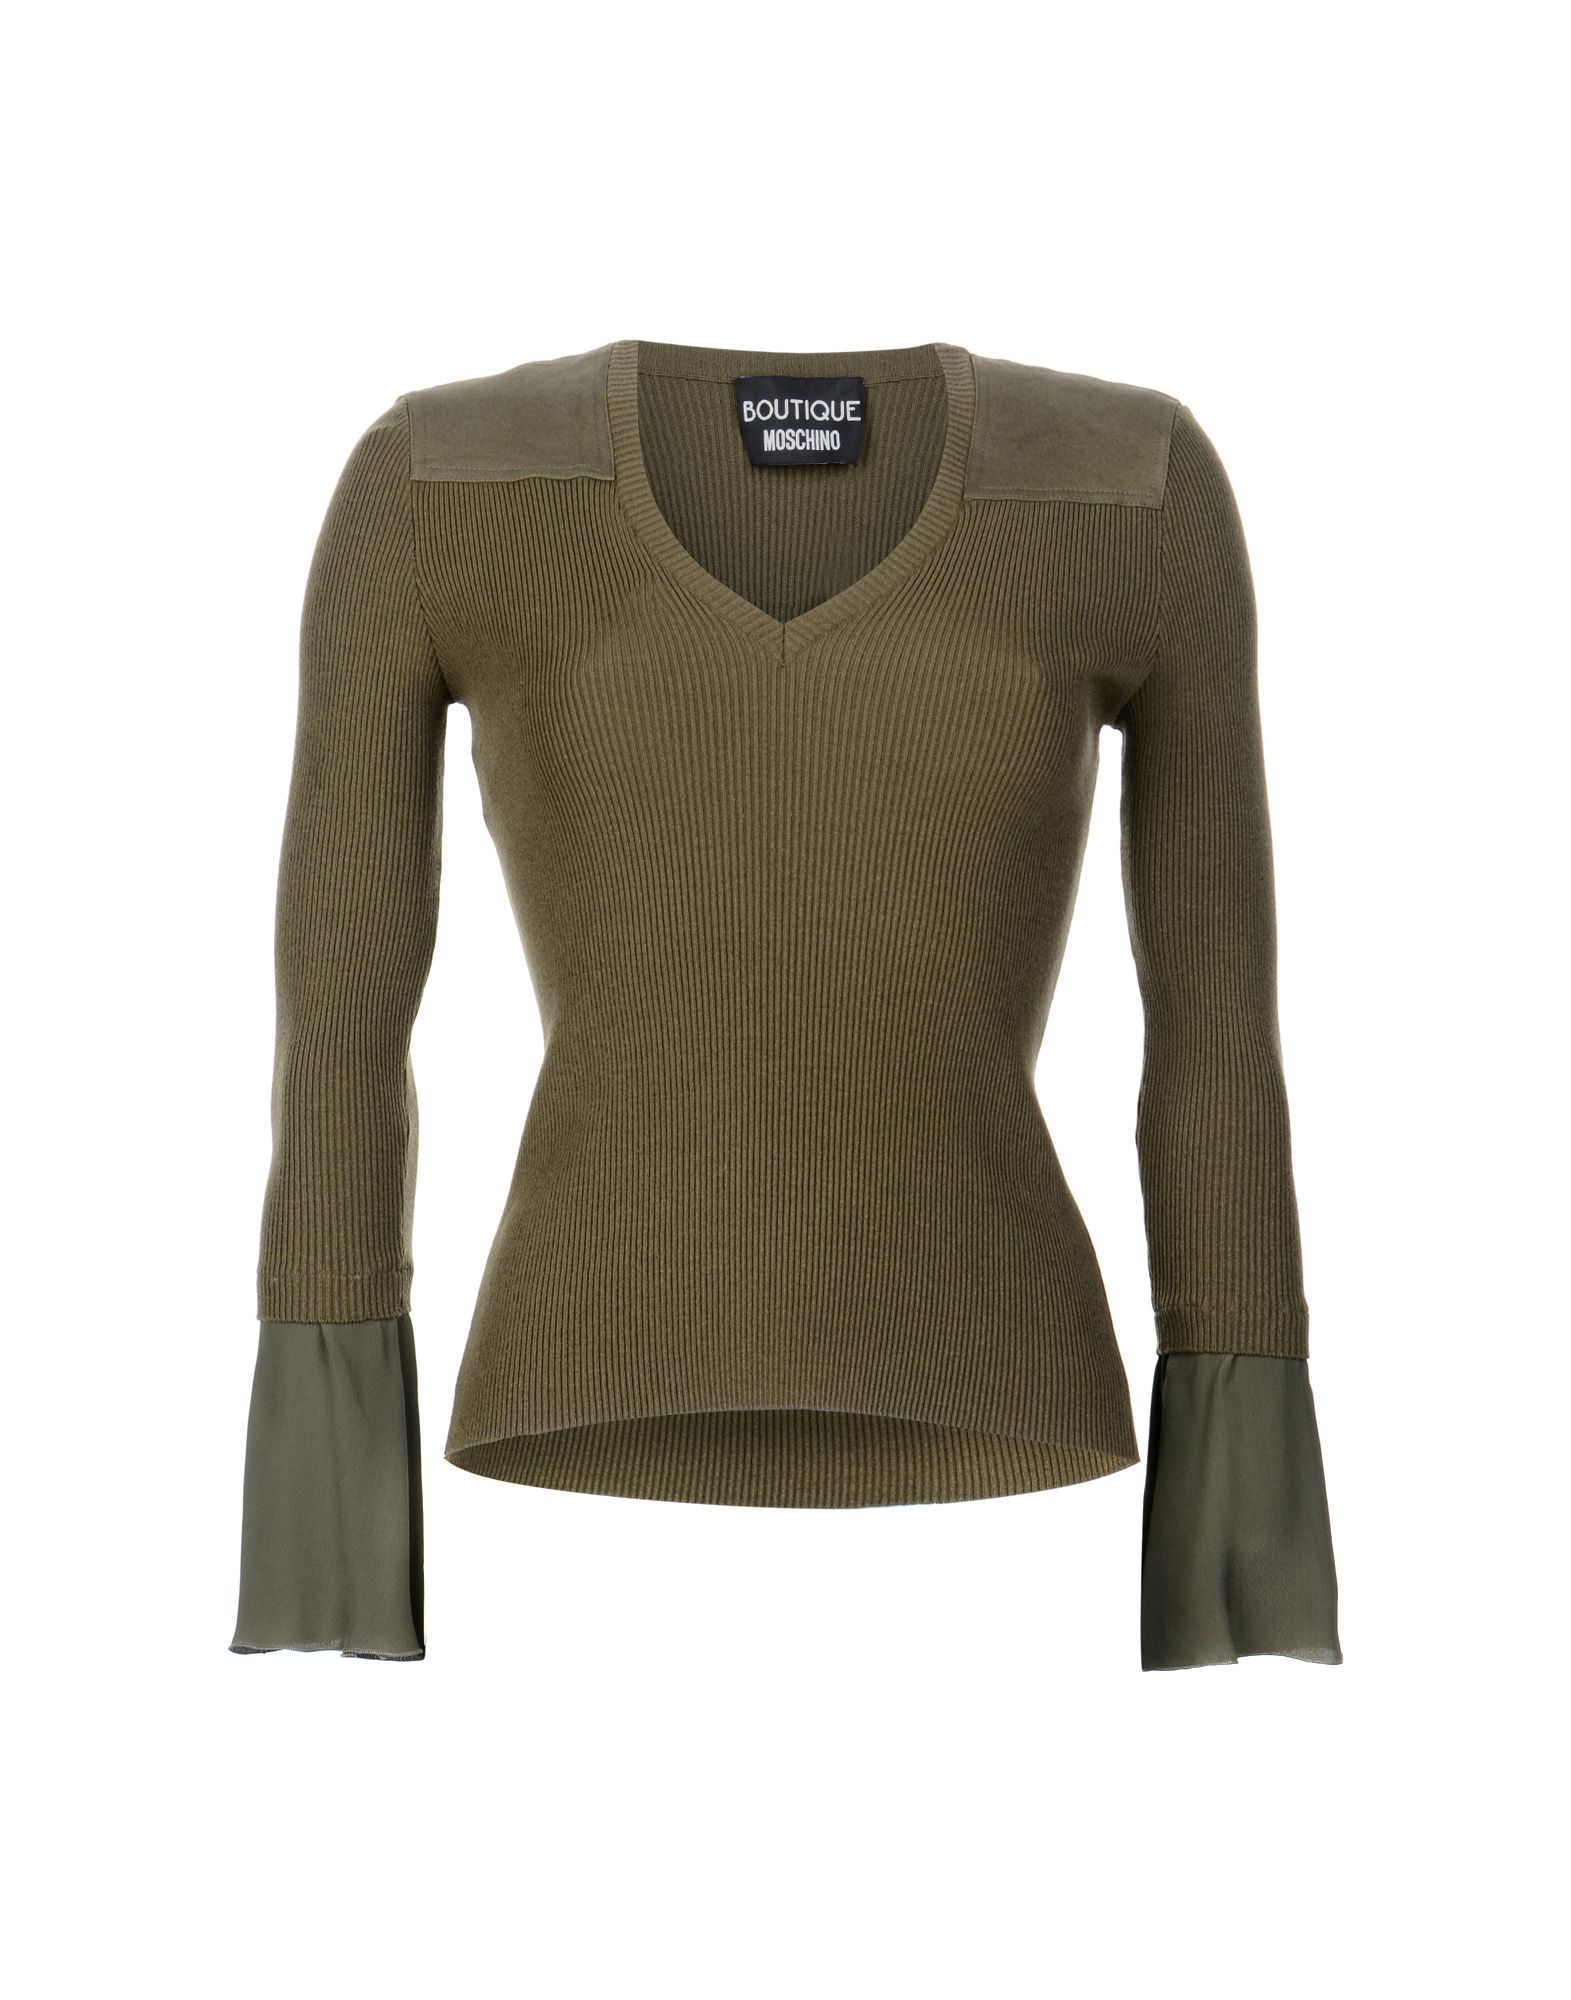 BOUTIQUE MOSCHINO BOUTIQUE MOSCHINO WOMAN SWEATER MILITARY GREEN SIZE 14 RAYON, POLYESTER, SILK,39838243QE 3